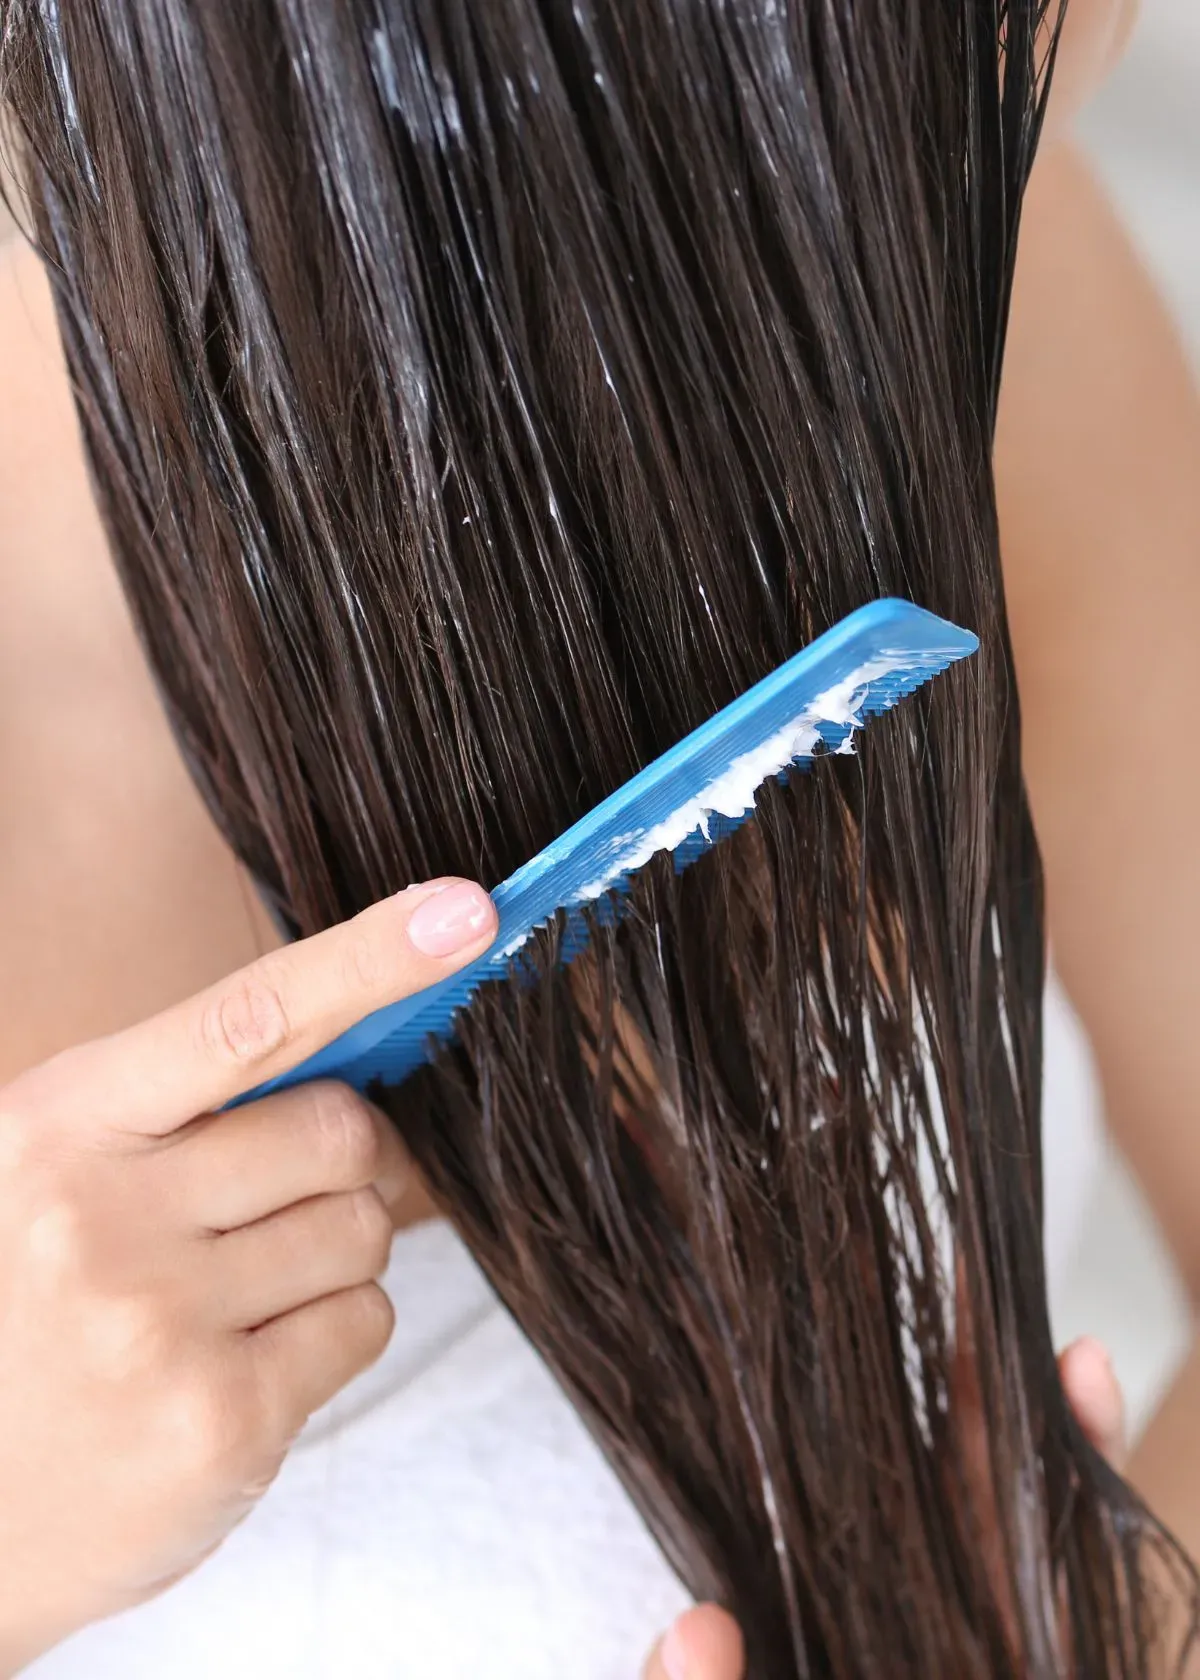 Does Leave in Conditioner Work? Benefits and Precautions